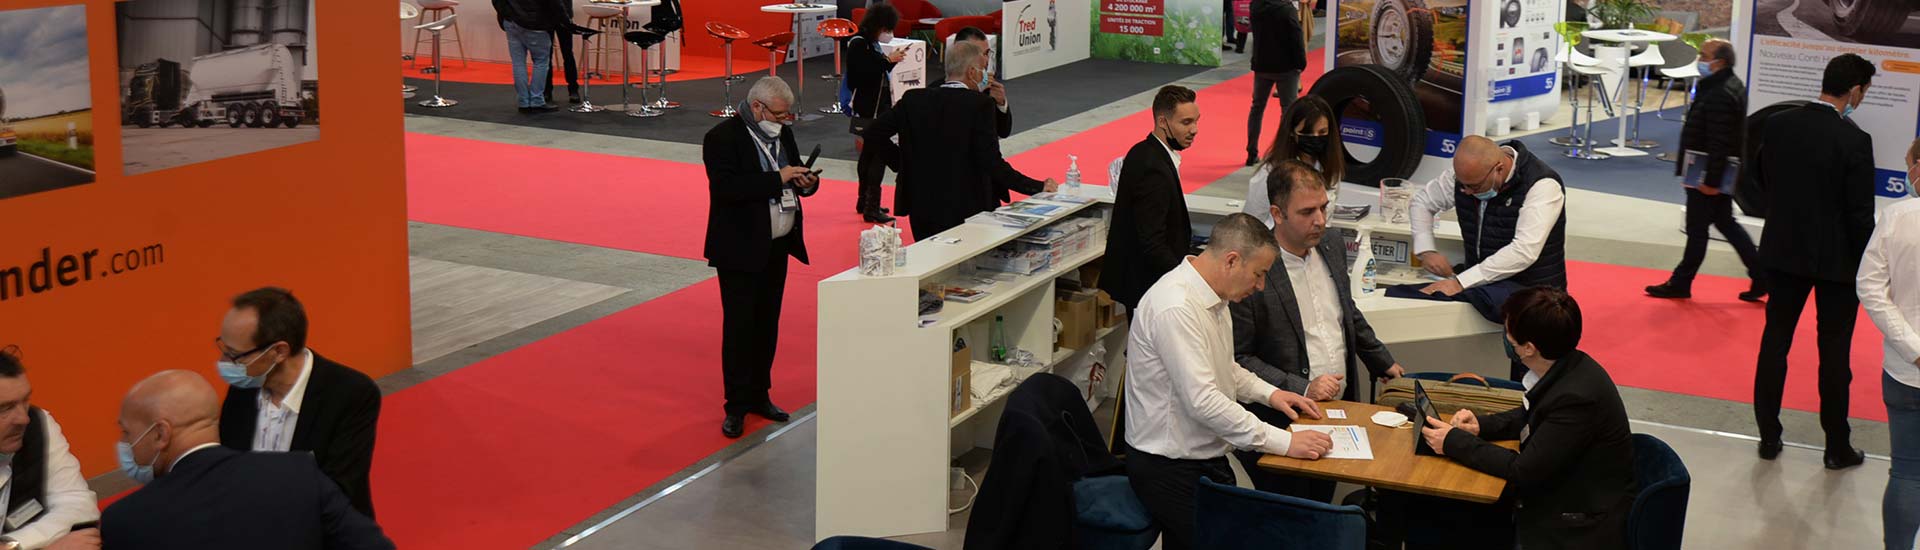 Exhibitors discussing around a stand